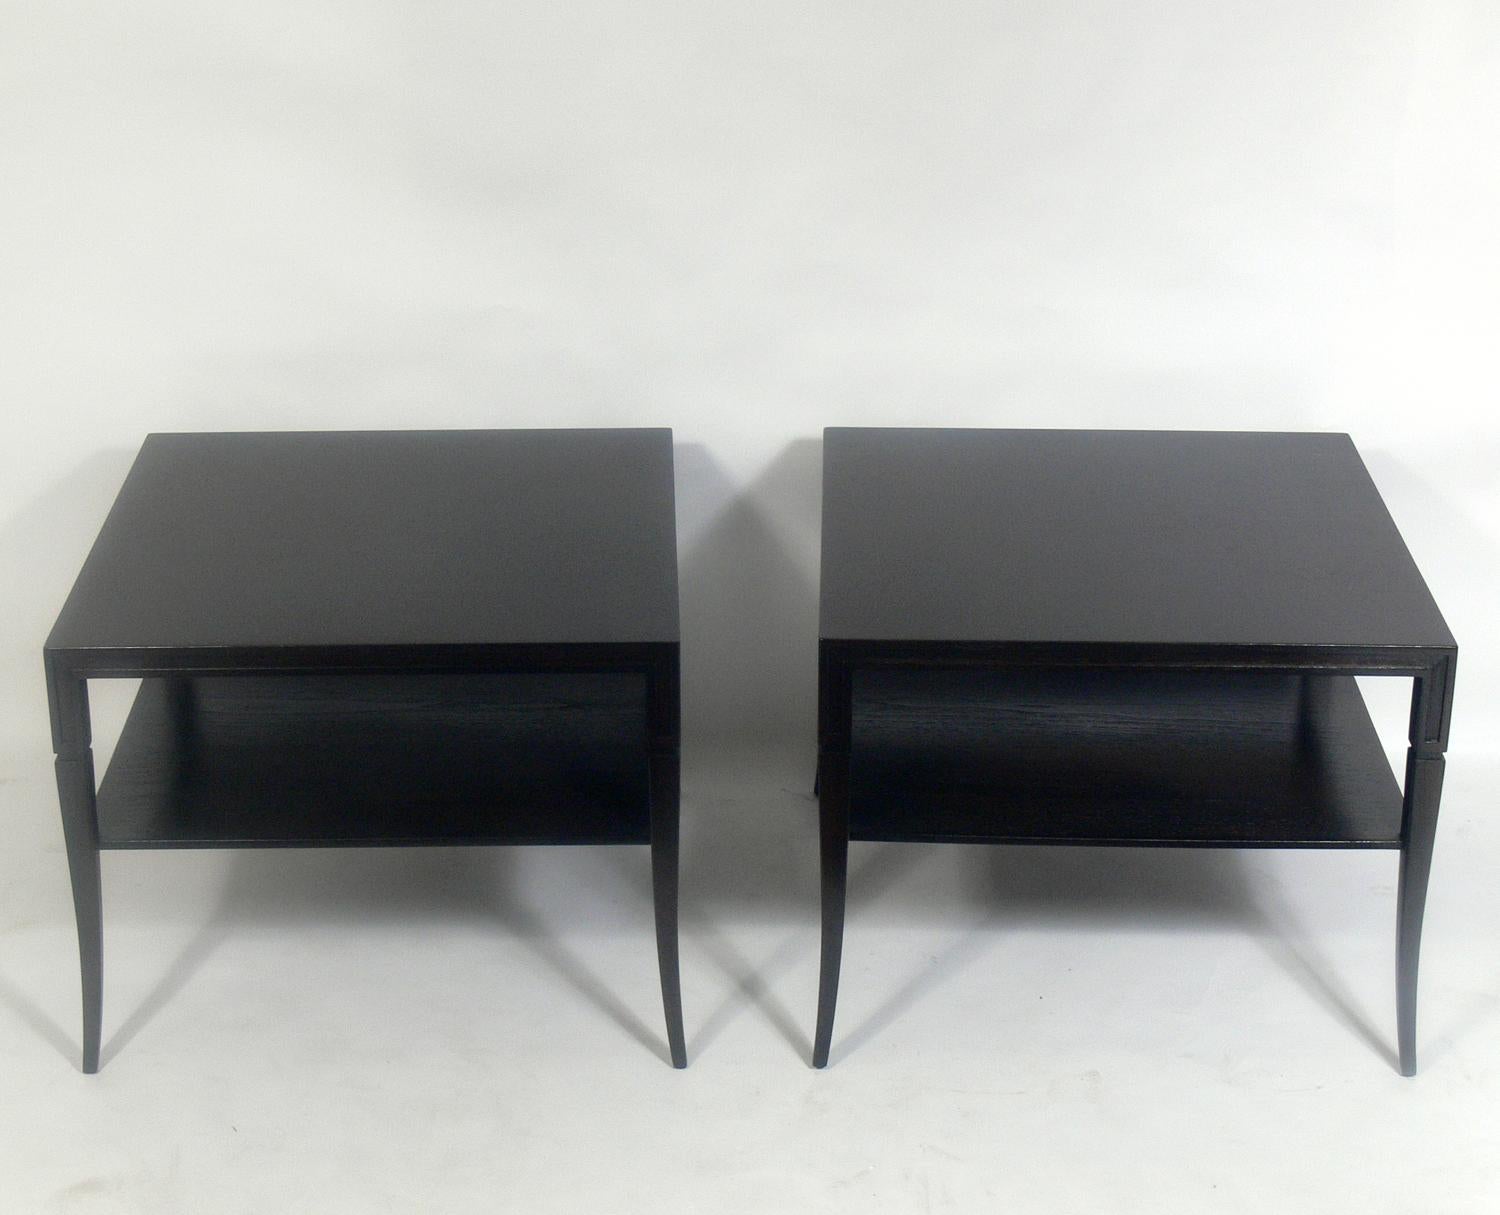 Pair of glamorous end tables, designed by Tommi Parzinger for Parzinger originals, American, circa 1950s. Signed with Parzinger originals label underneath. They have been refinished in an ultra-deep brown color lacquer. They are a versatile size and